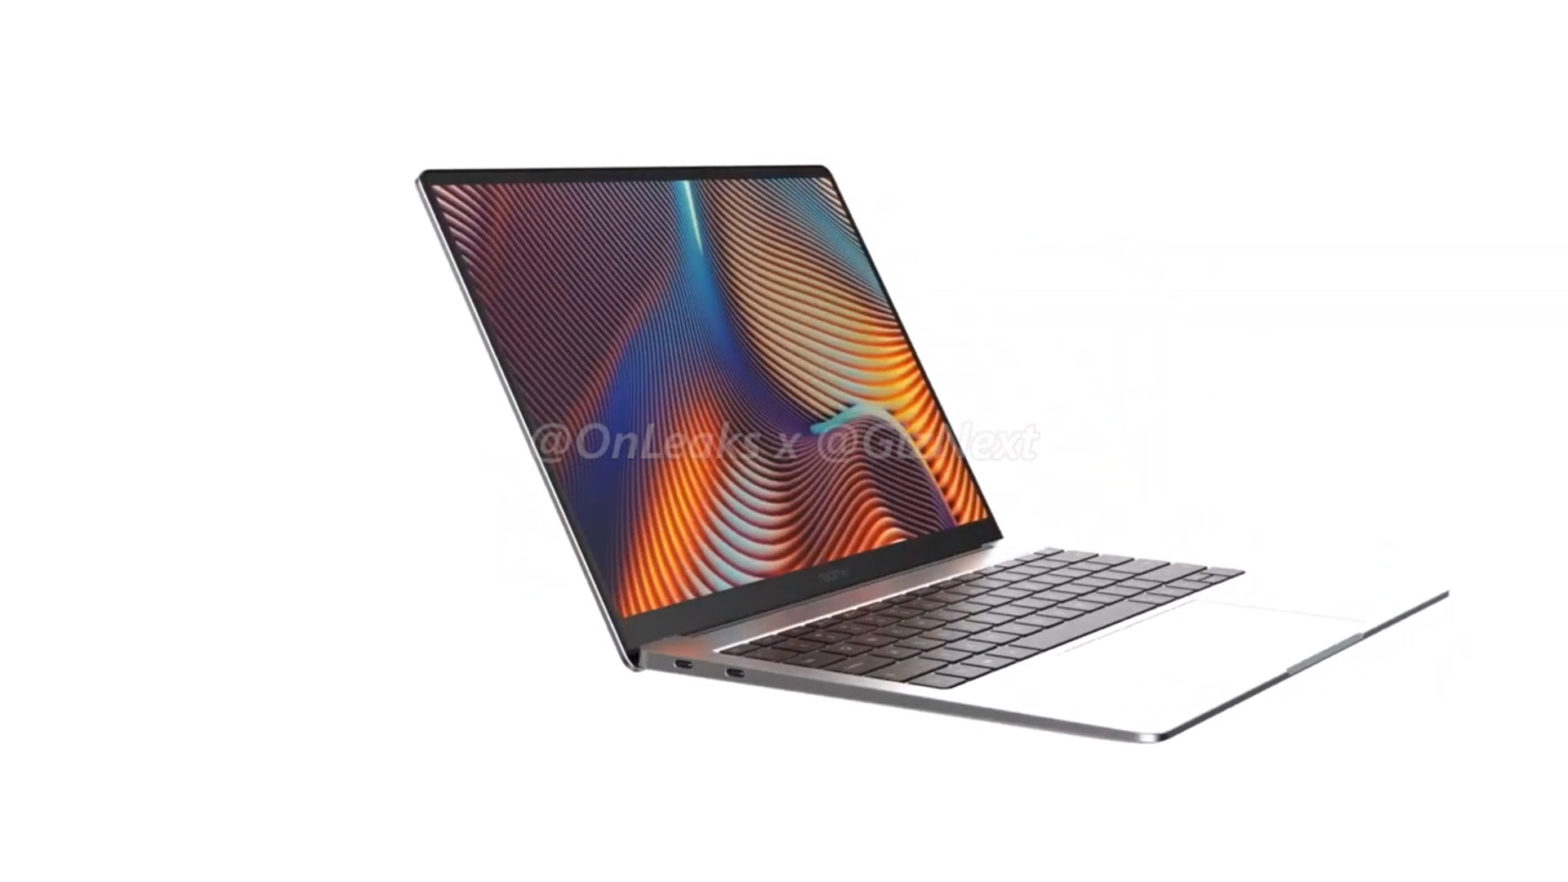 Realme Book leak gives us a comprehensive look at Realme’s first laptop